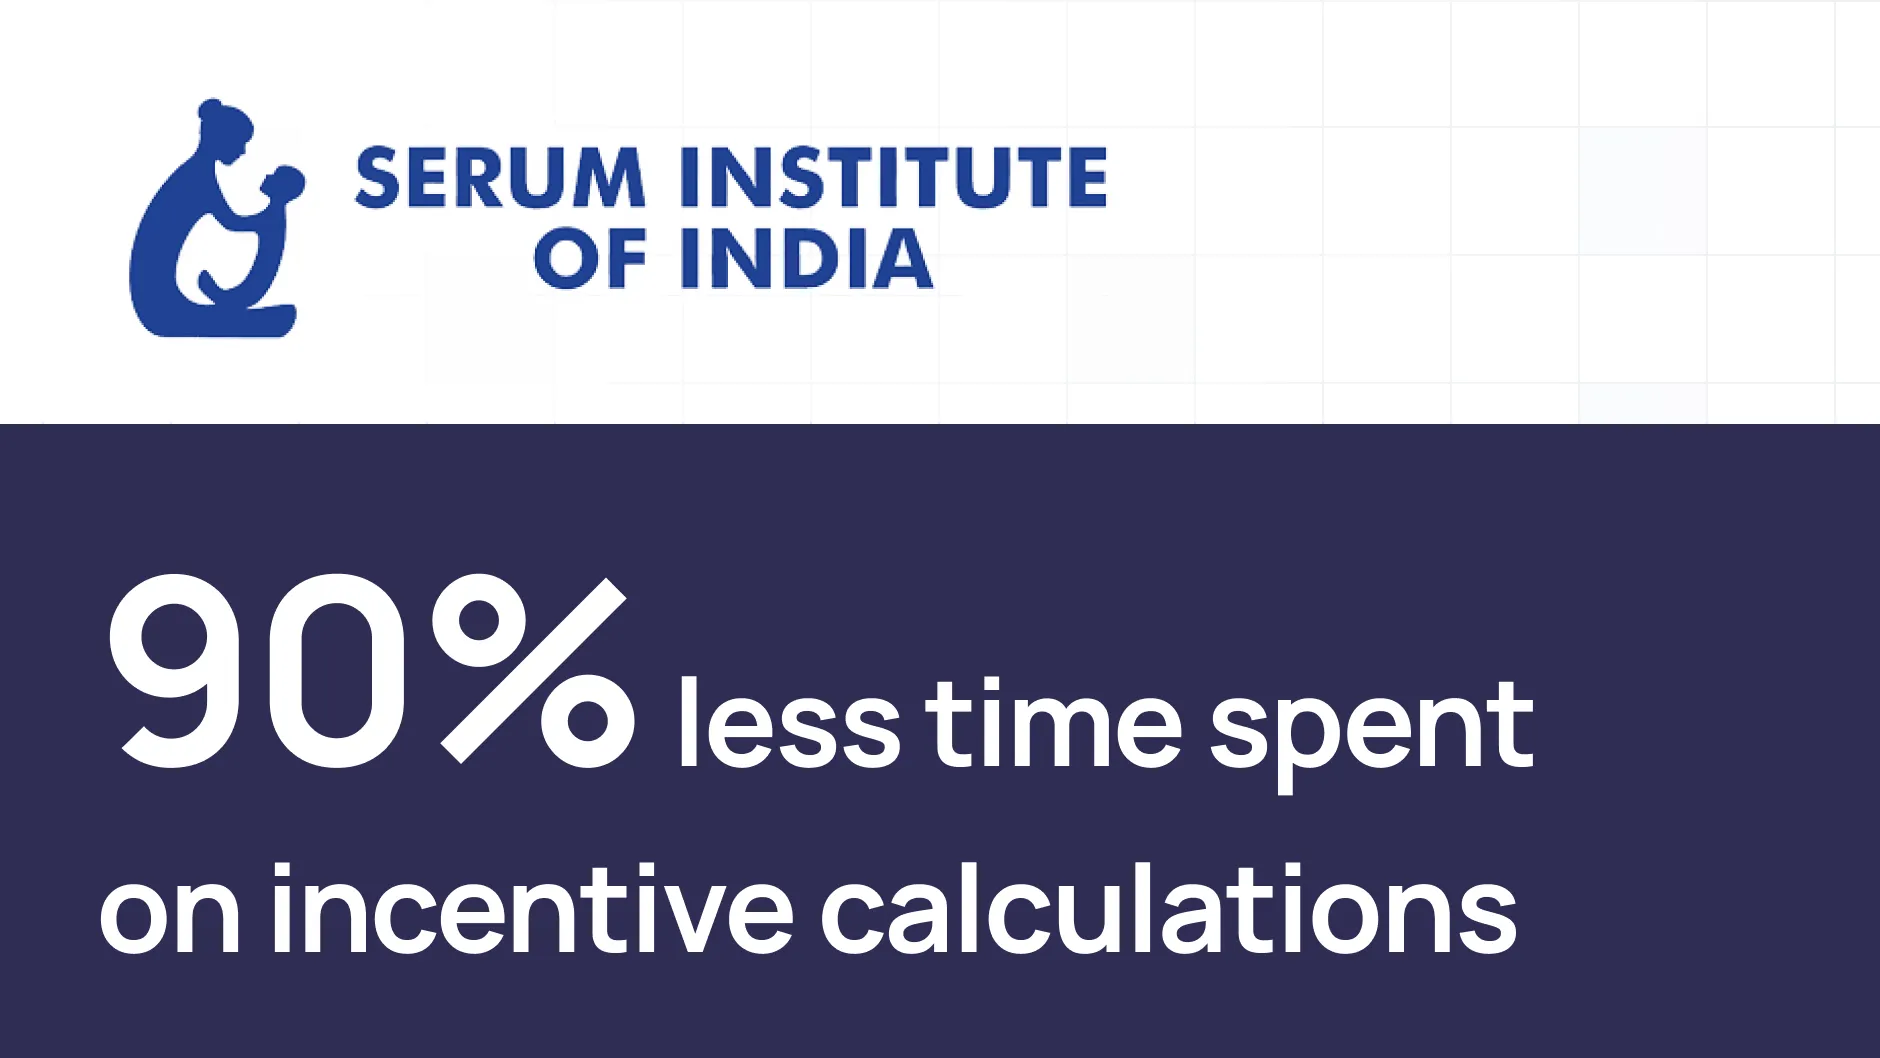 Serum Institute of India reduces commission payout time from a month to 3 days